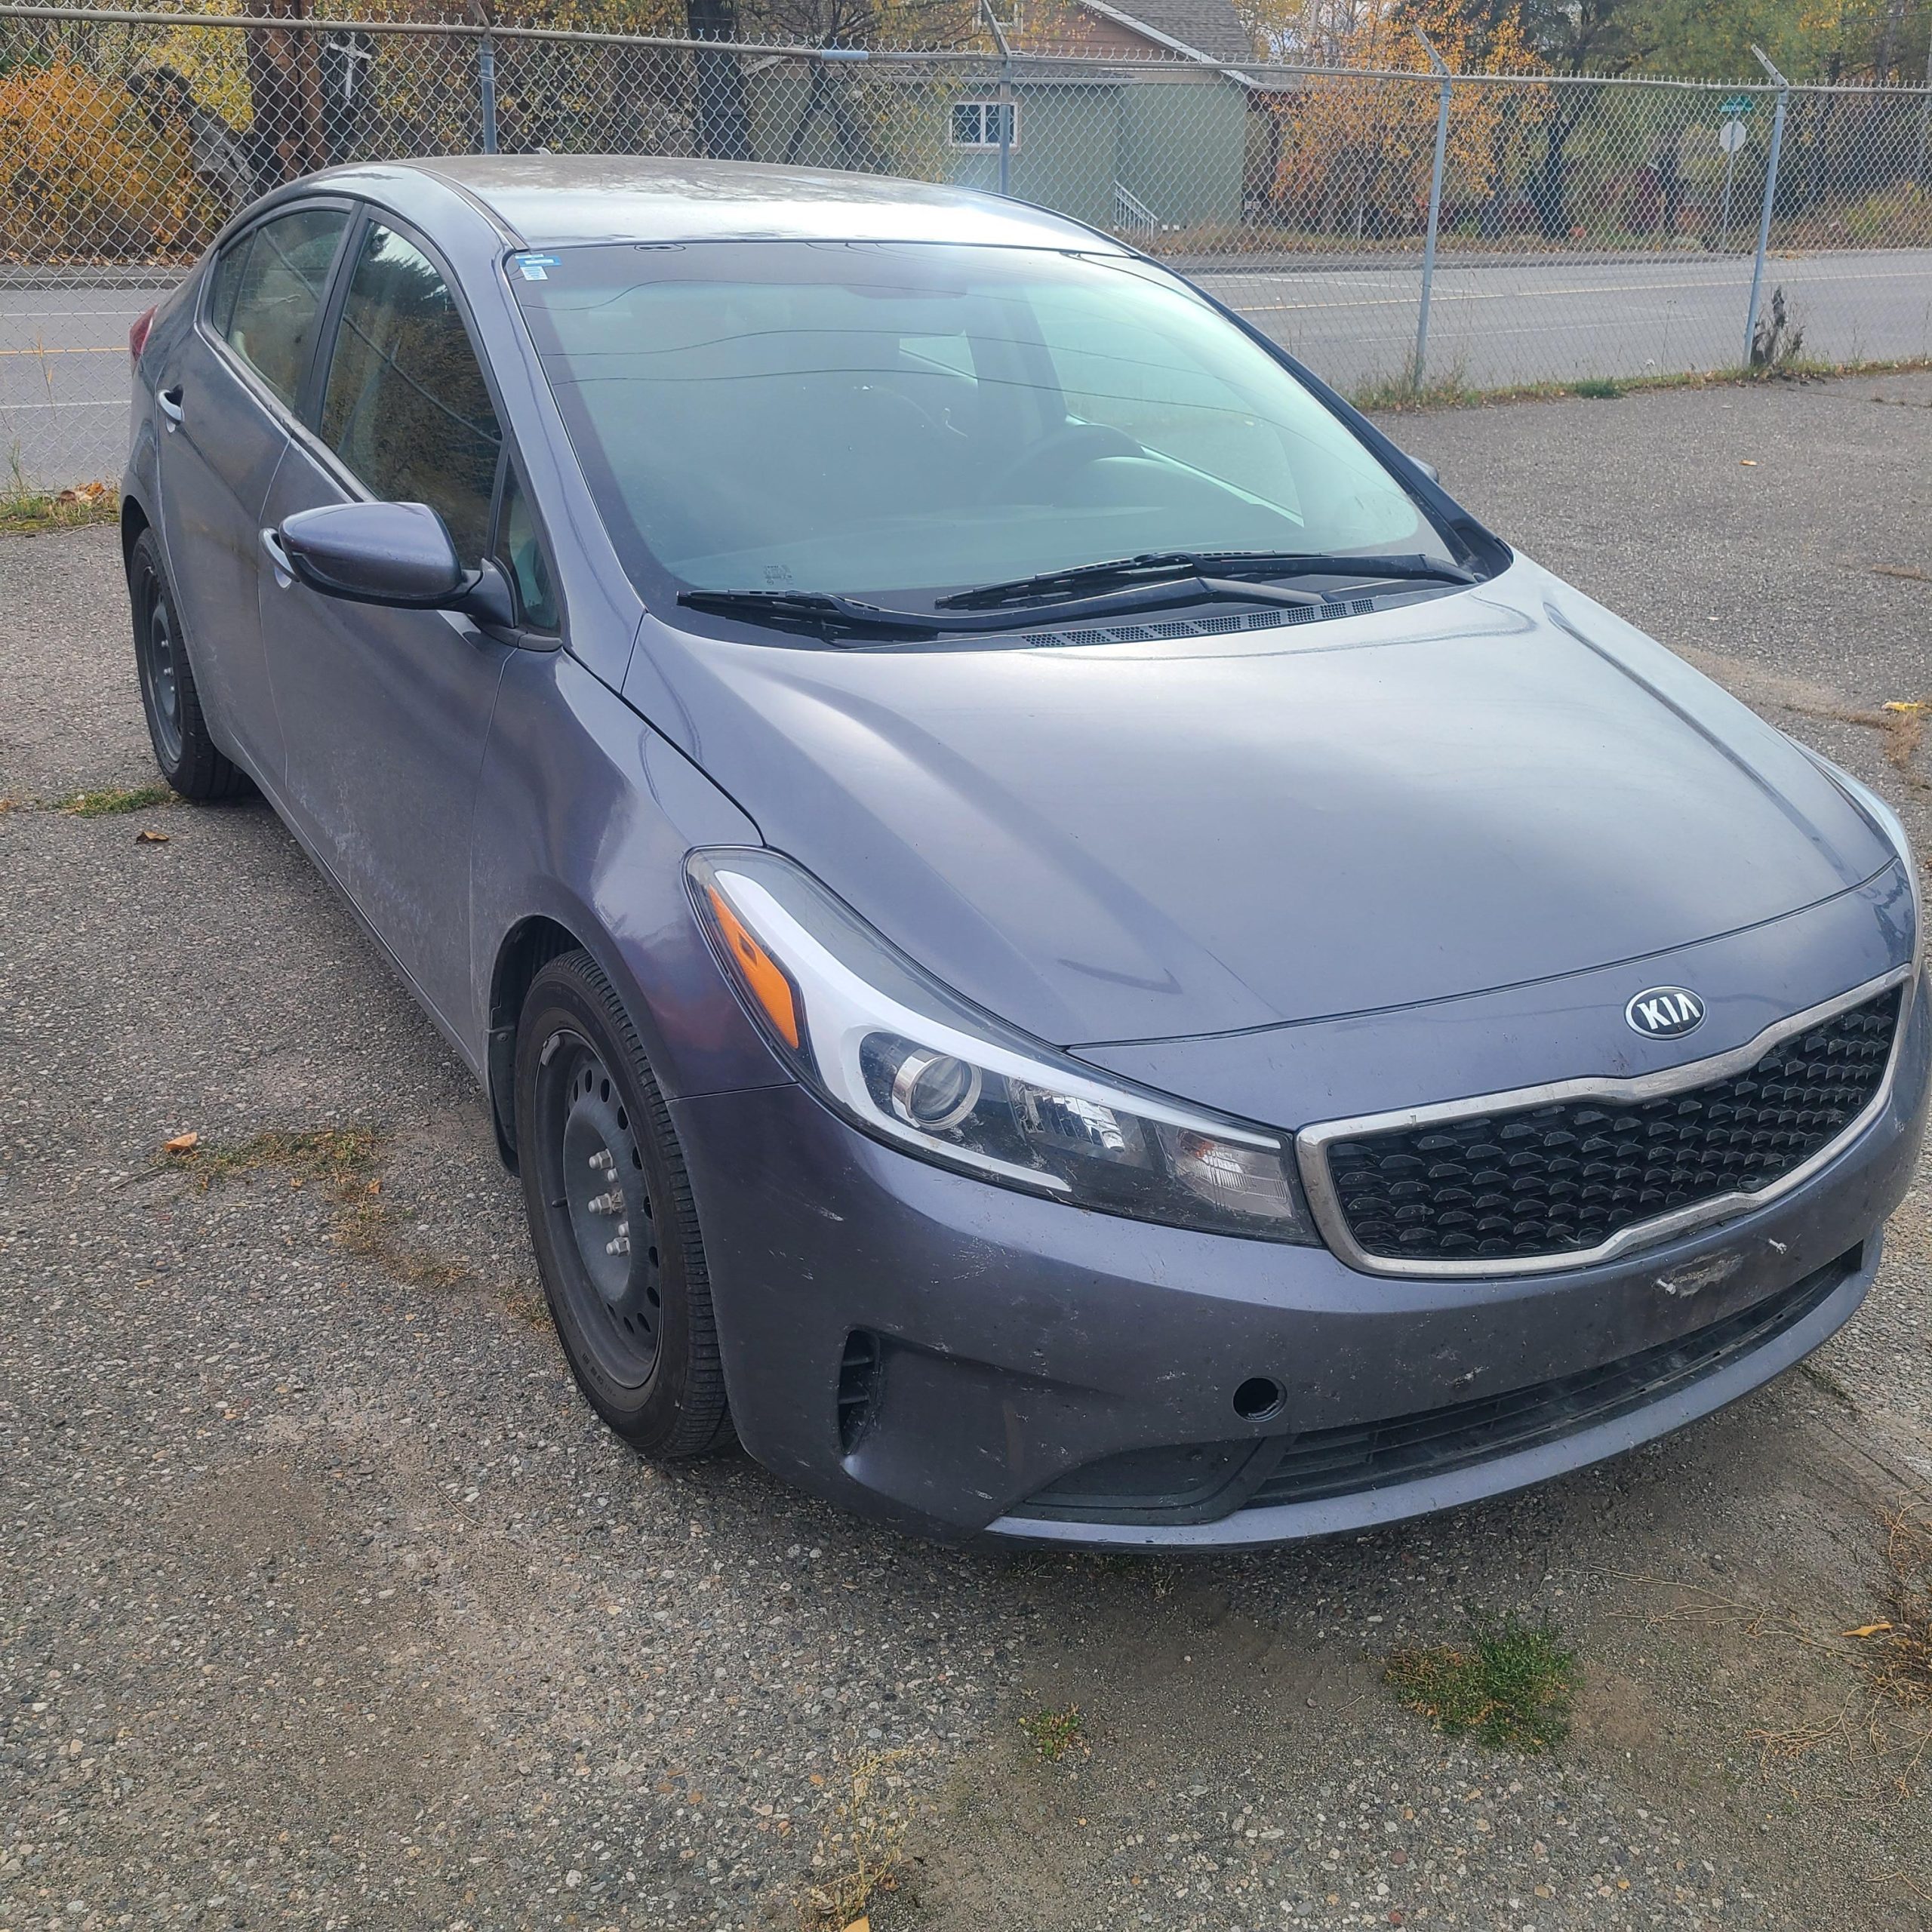 2018 Kia Forte  B-PG-0685 Located in Prince George